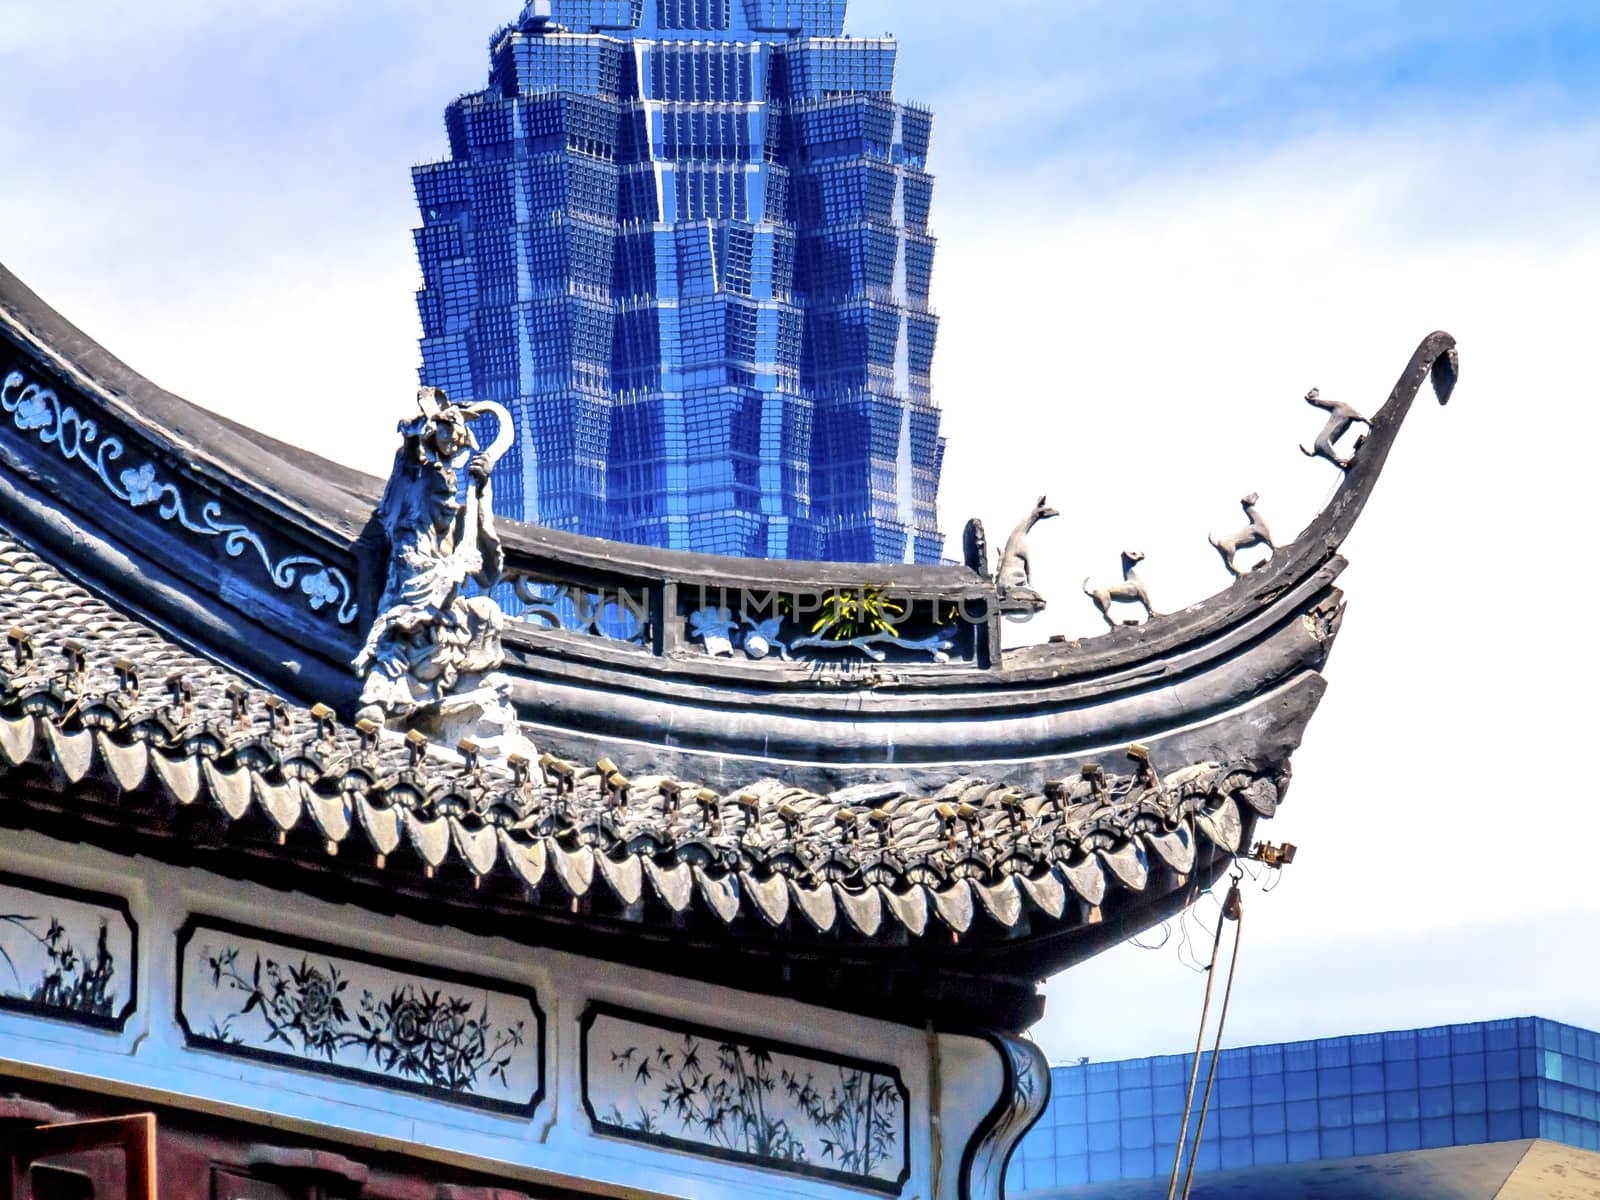 Jin Mao Tower, third highest building, from Yuyuan Garden, Old Town, Shanghai China